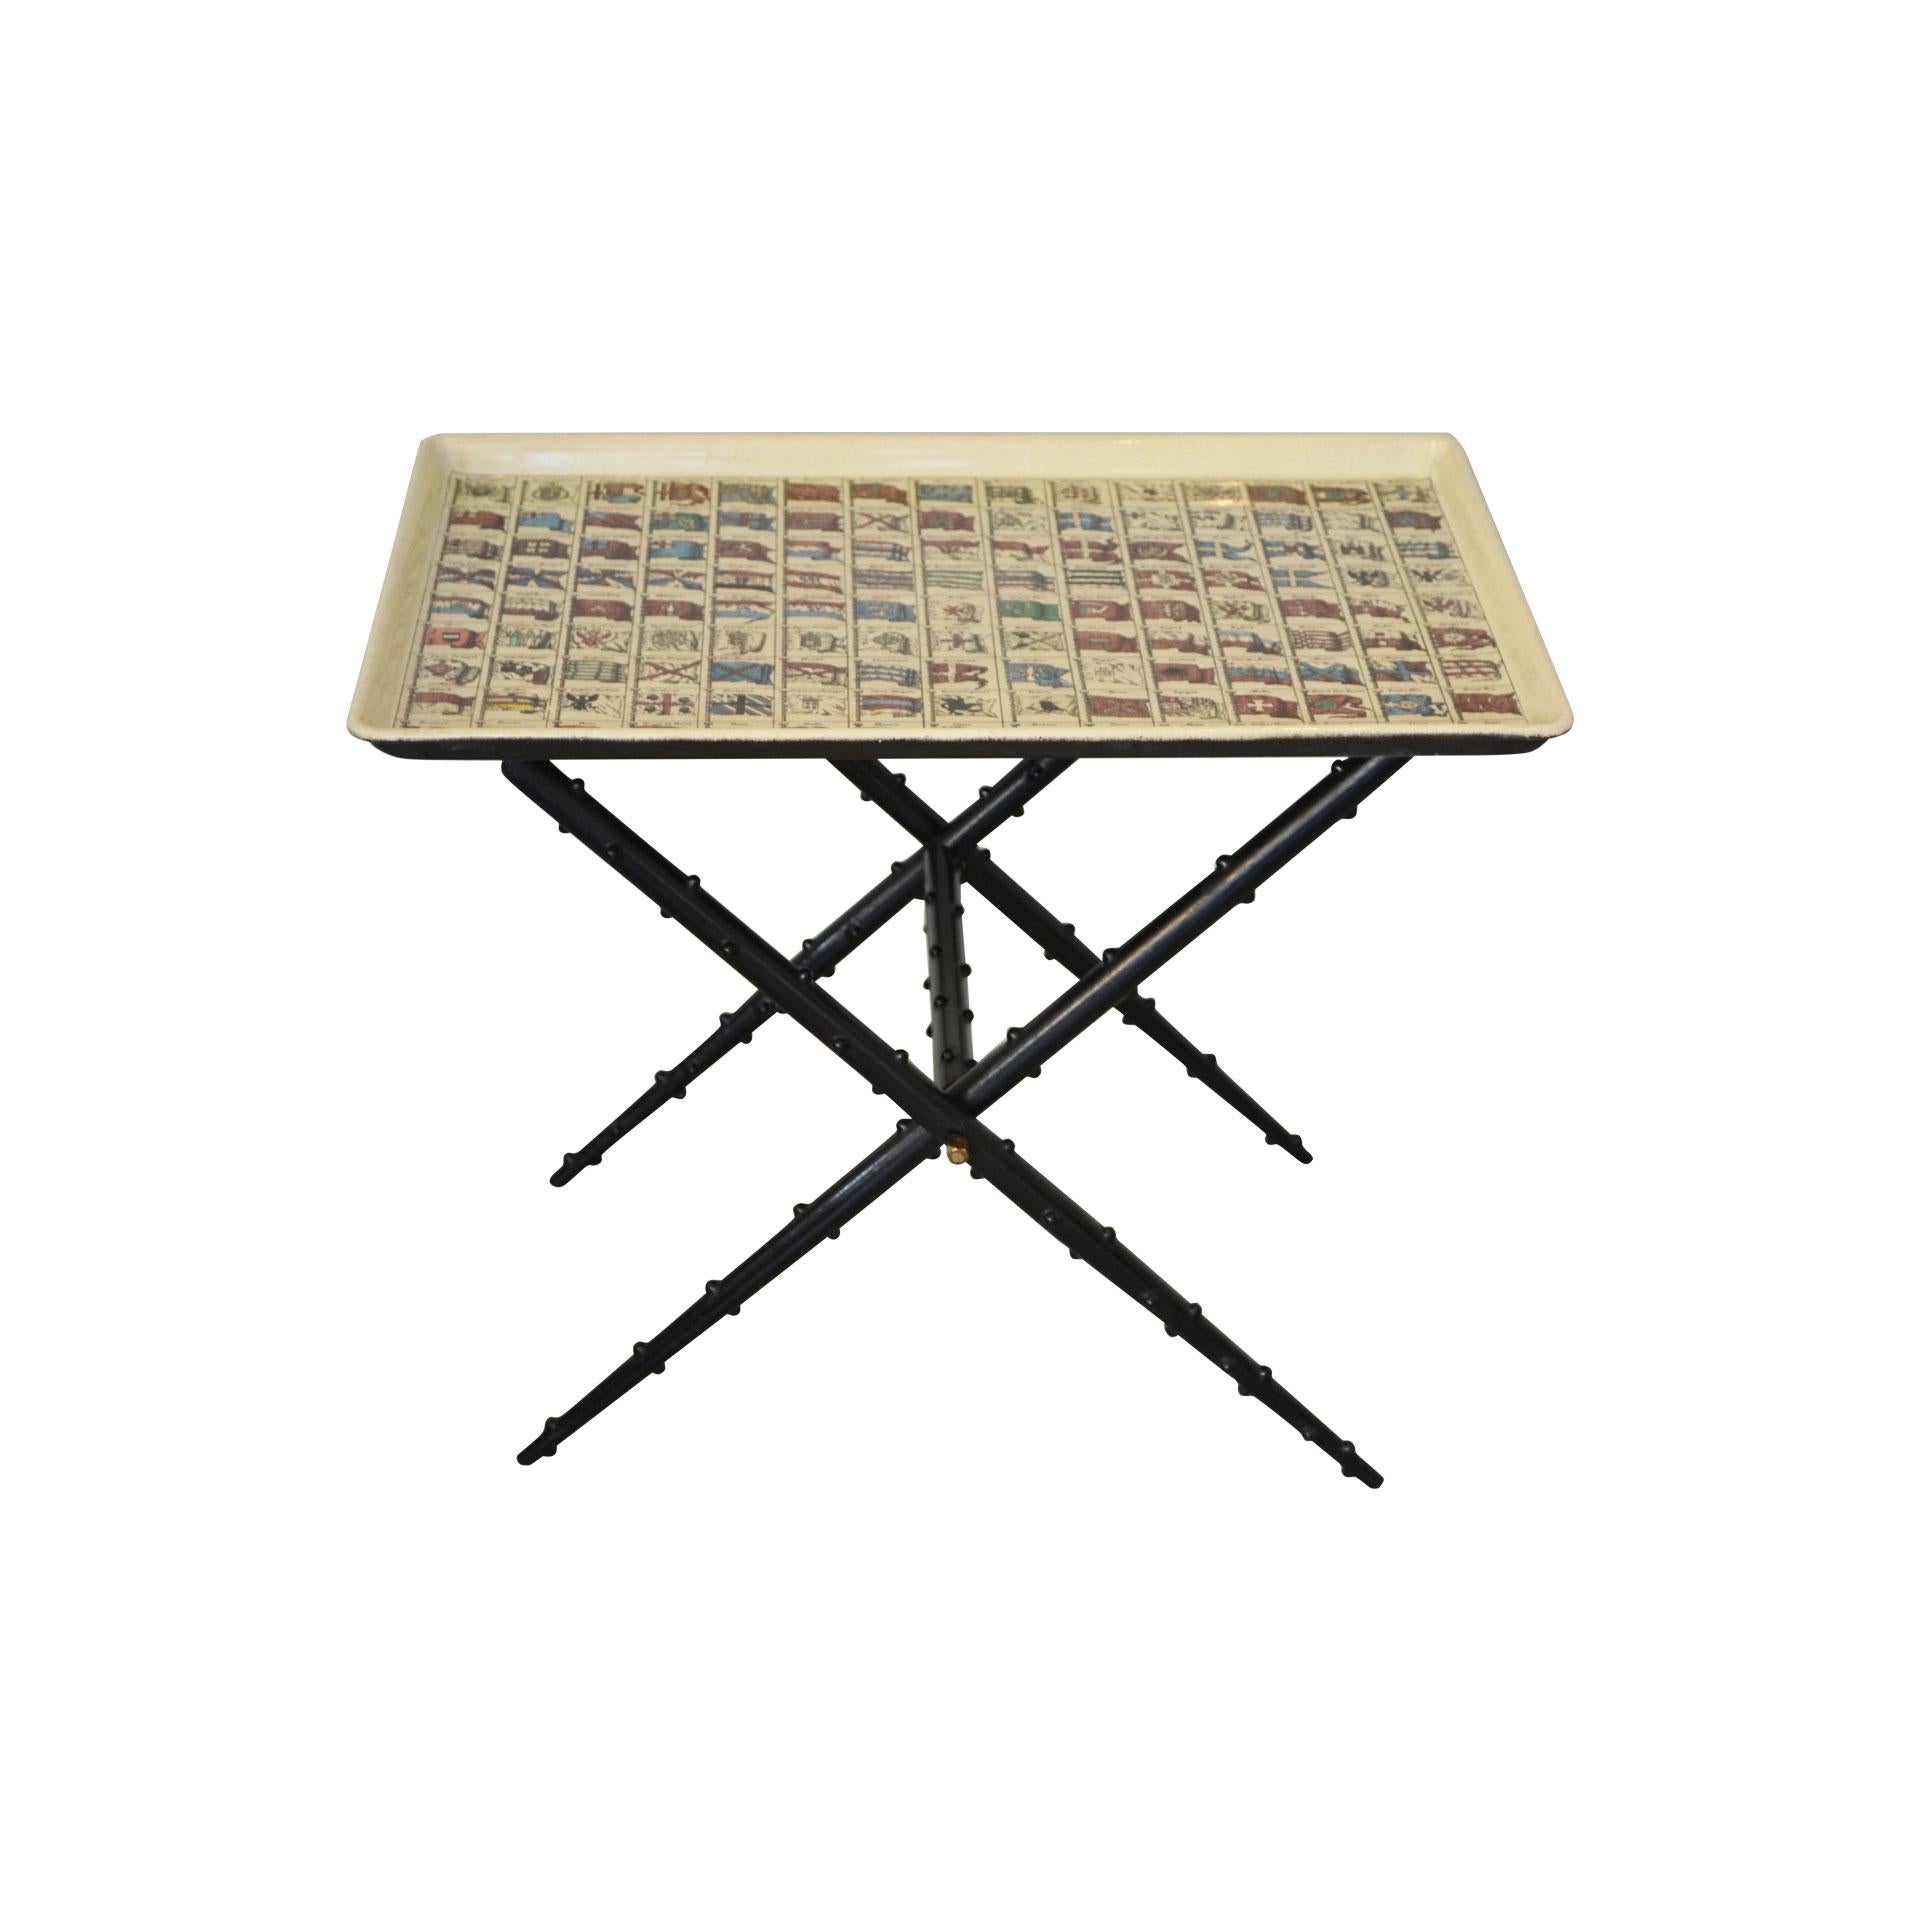 Low table with folding structure and removable tray with theme flags, designed by Piero Fornasetti in the 1960s. Structure in lacquered metal and tray in screen printed metal. There is the manufacturer's label and brand name under tray as shown in